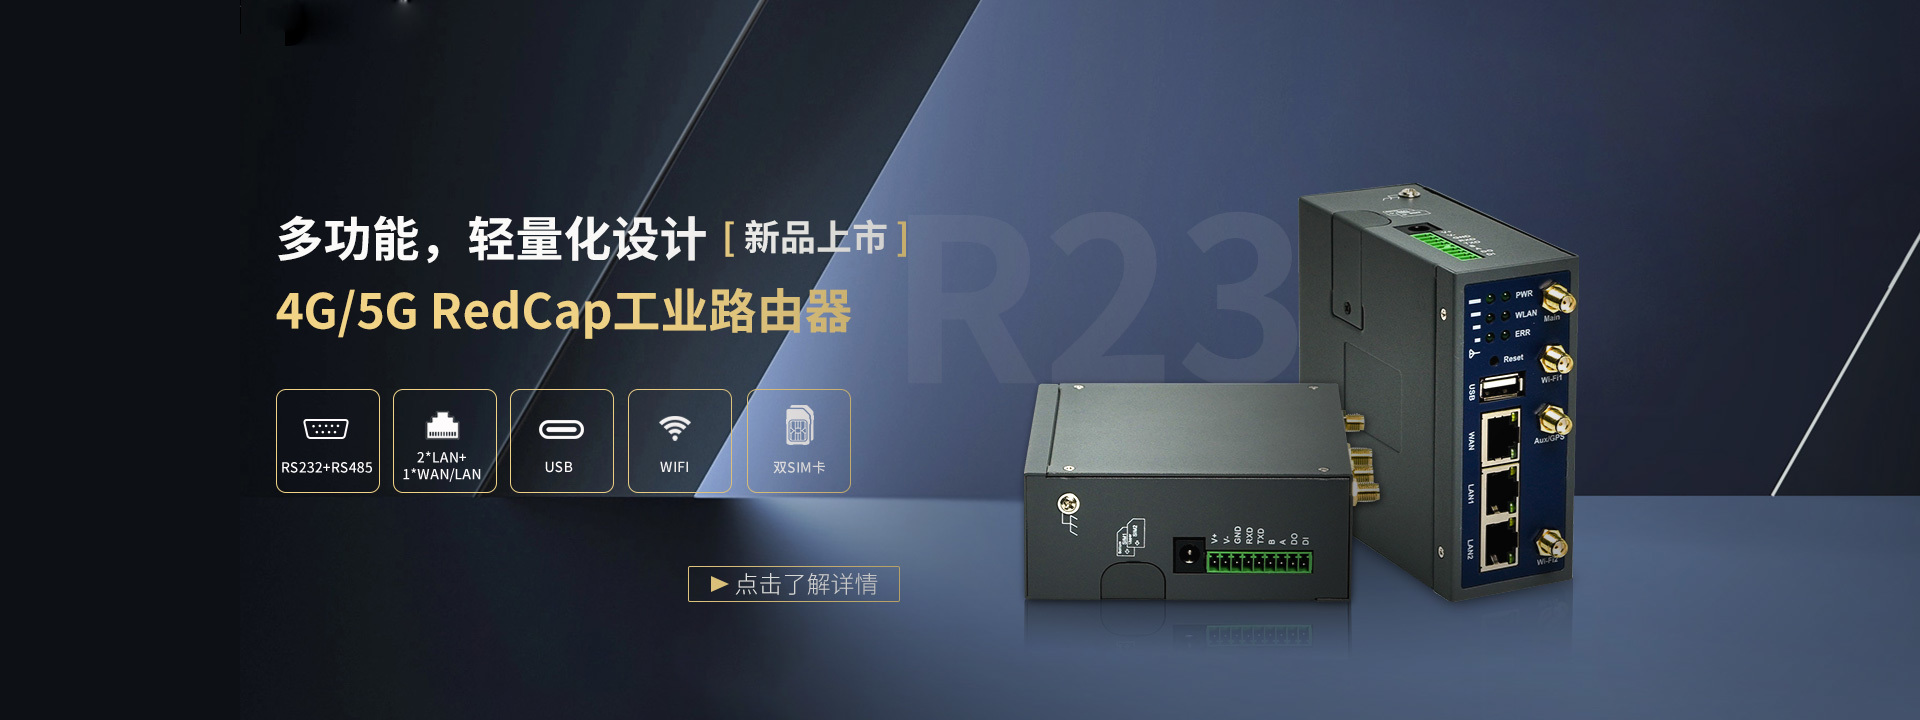 R23 4G/5G Industrial Router